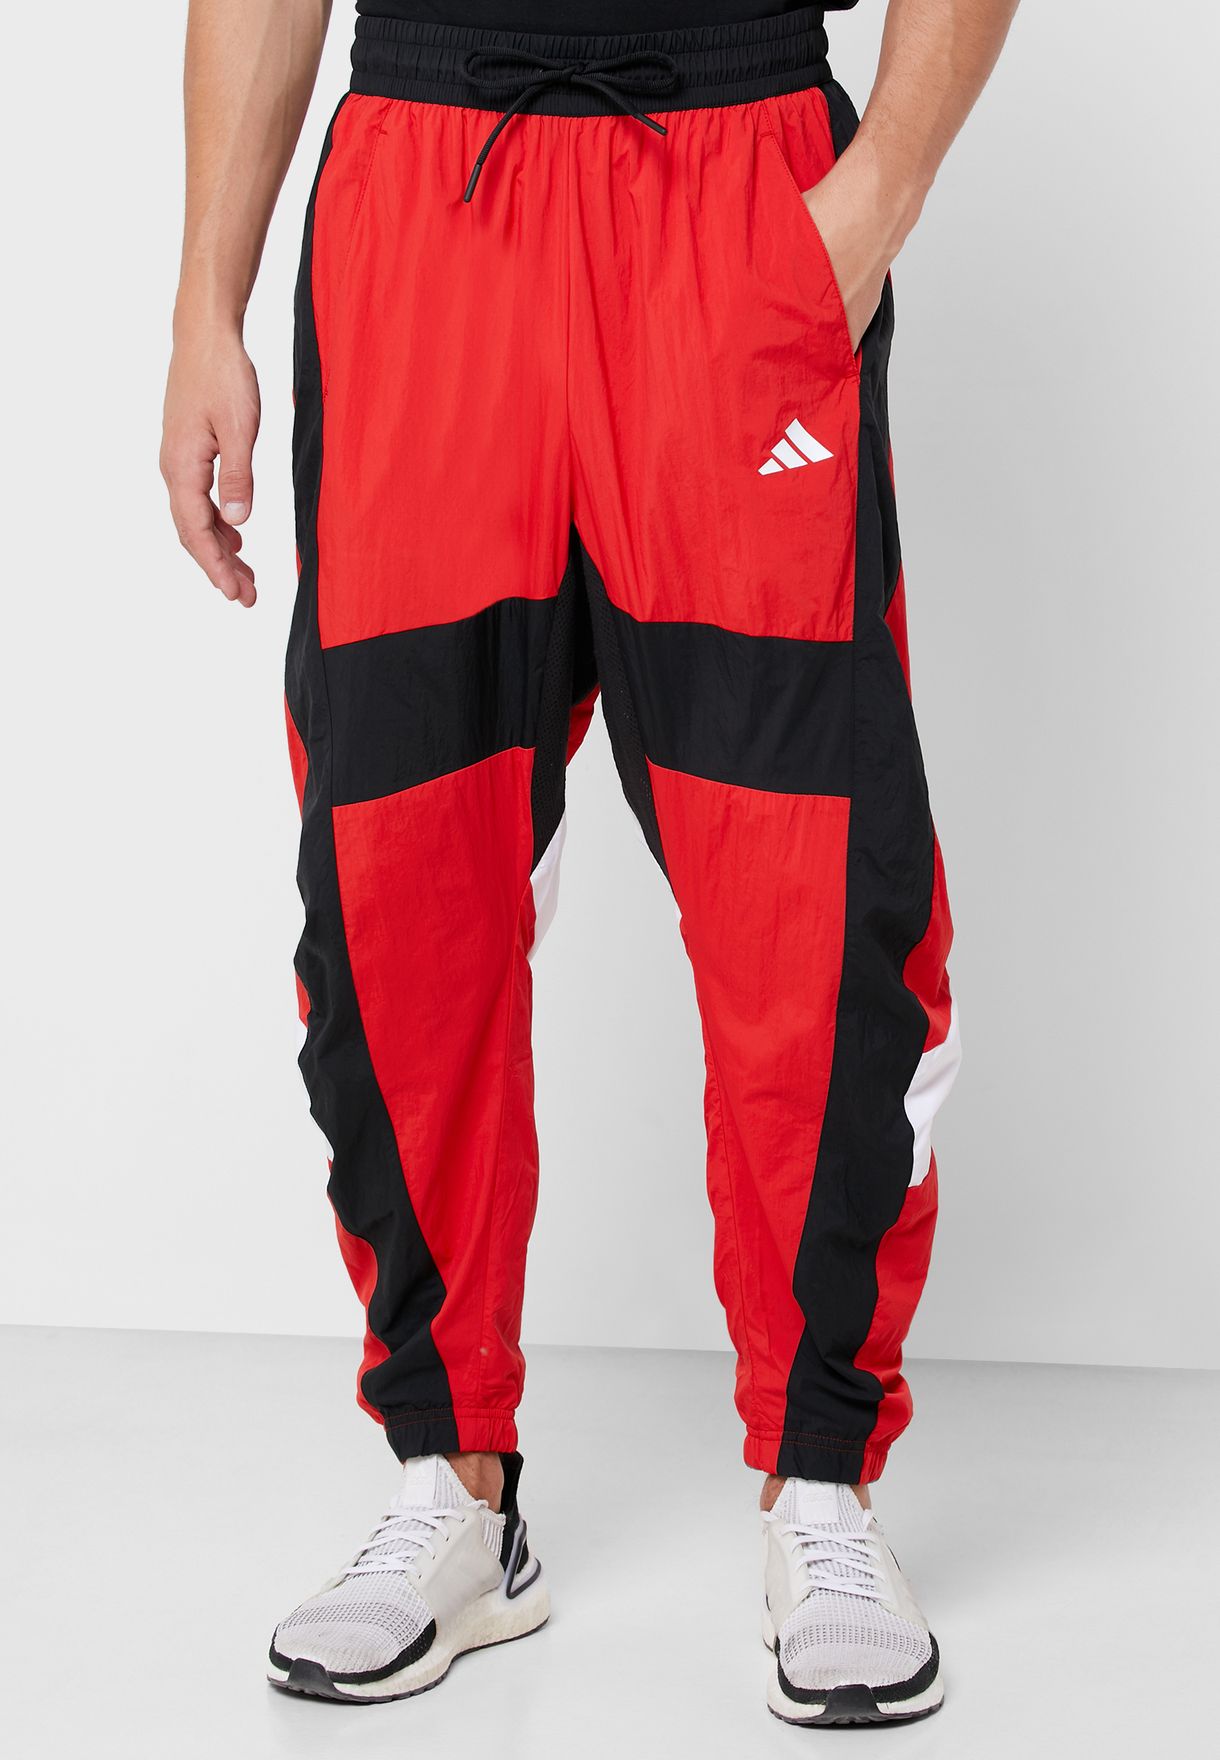 Buy adidas red O Shape Sweatpants for 